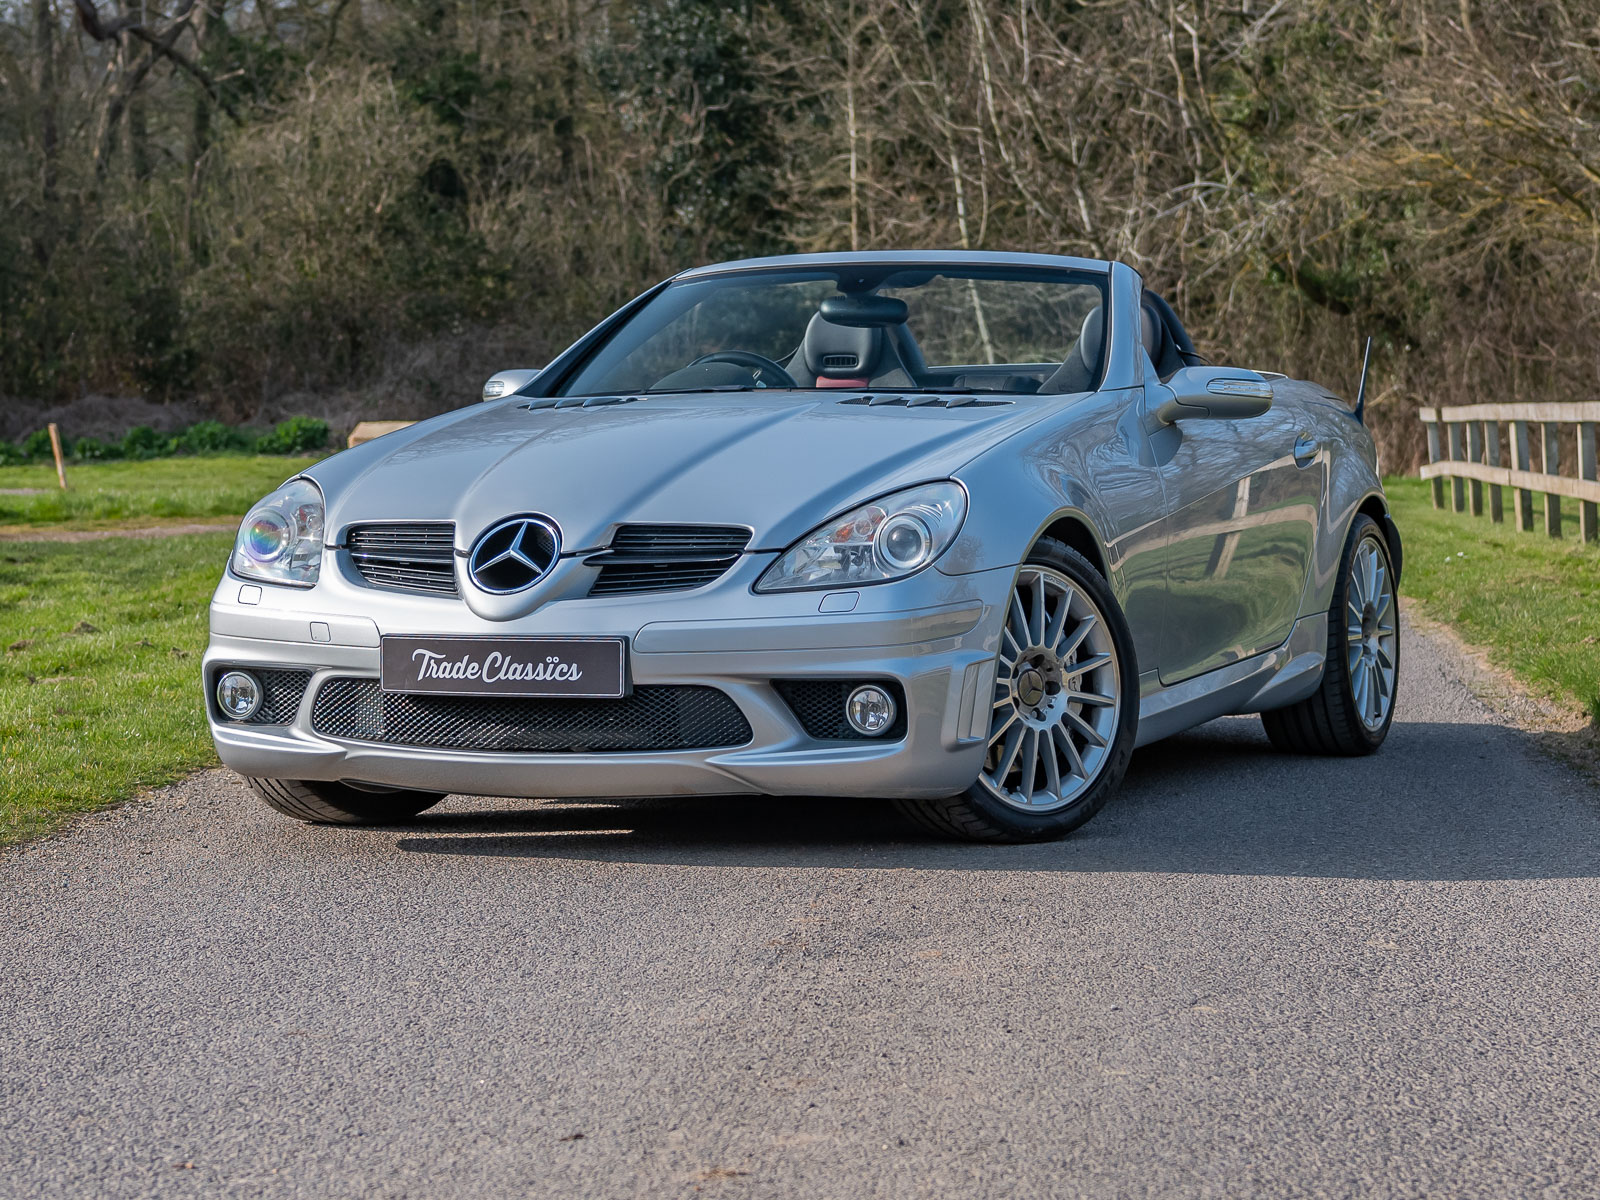 Top Gear - Mercedes-Benz SLK R171 review by James May 